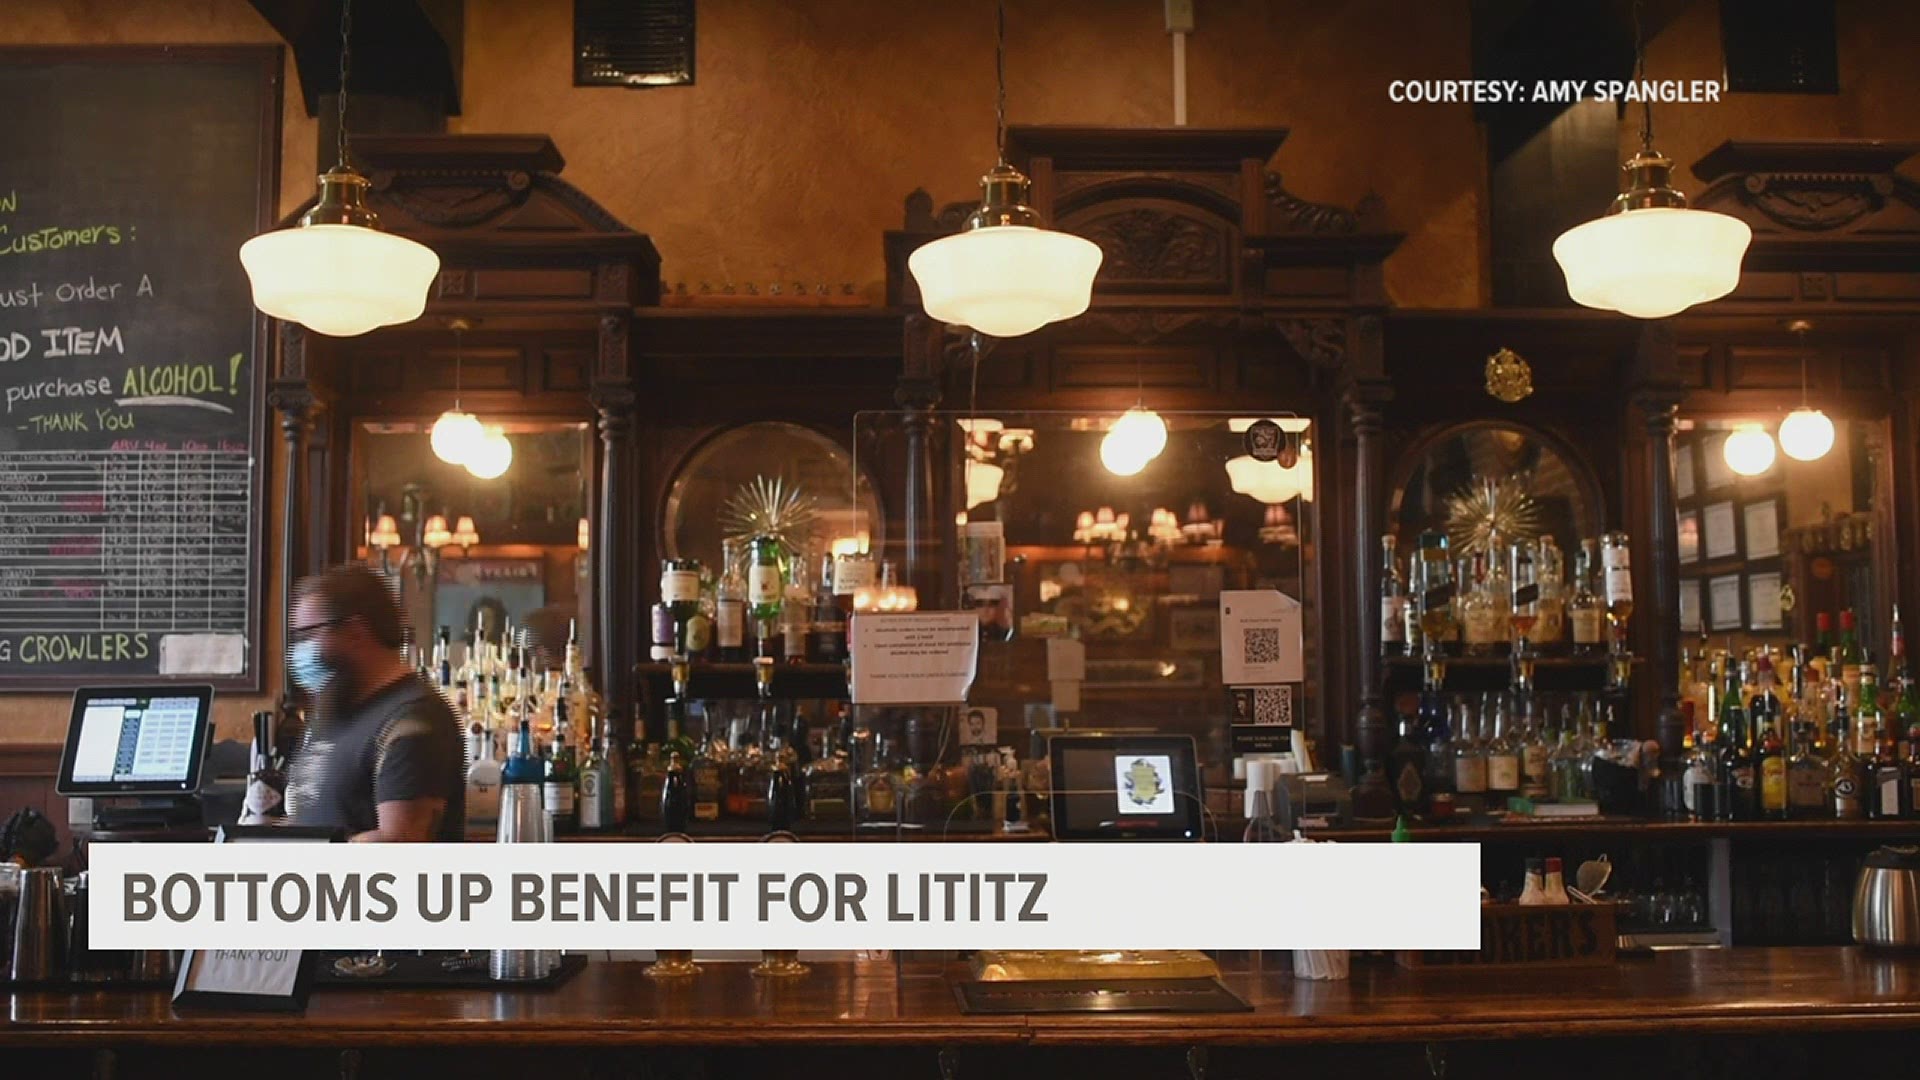 With COVID-19 business closures and gathering restrictions limiting or canceling popular events in Lititz, the town is looking for new ways to bring in business.